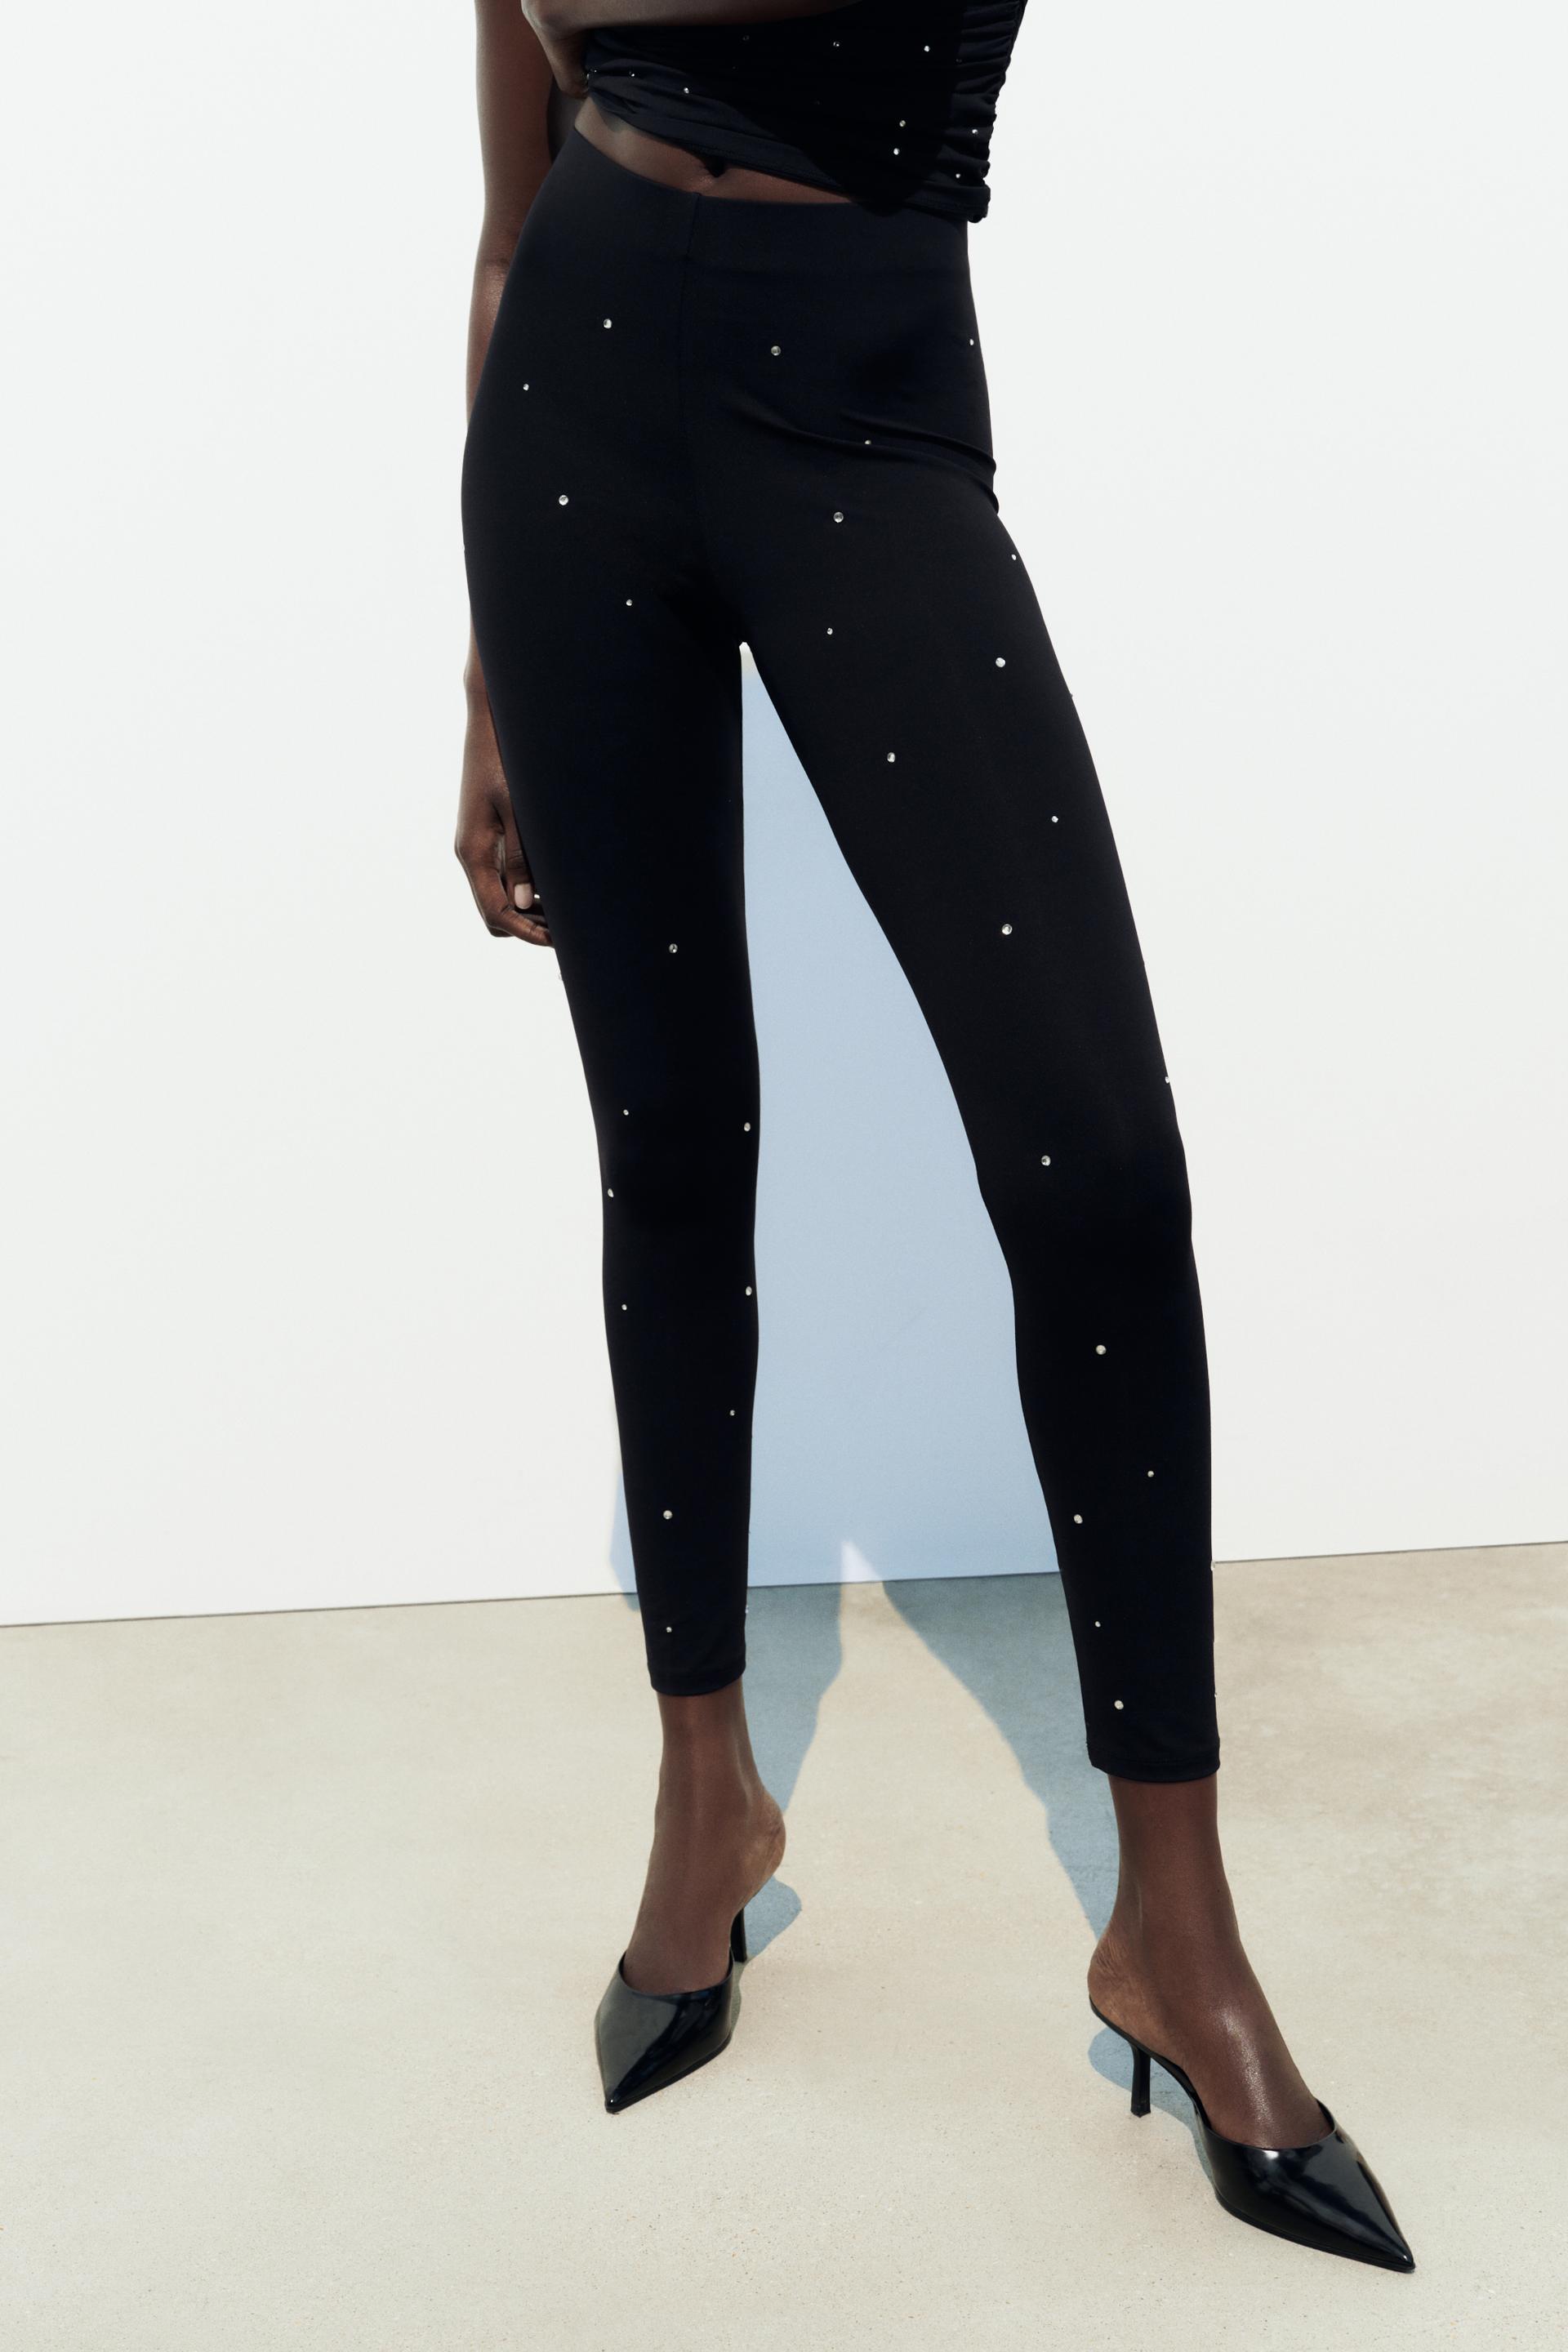 Sara Black High Waisted Thick Ponte Leggings With Zip Detail – Style Cheat